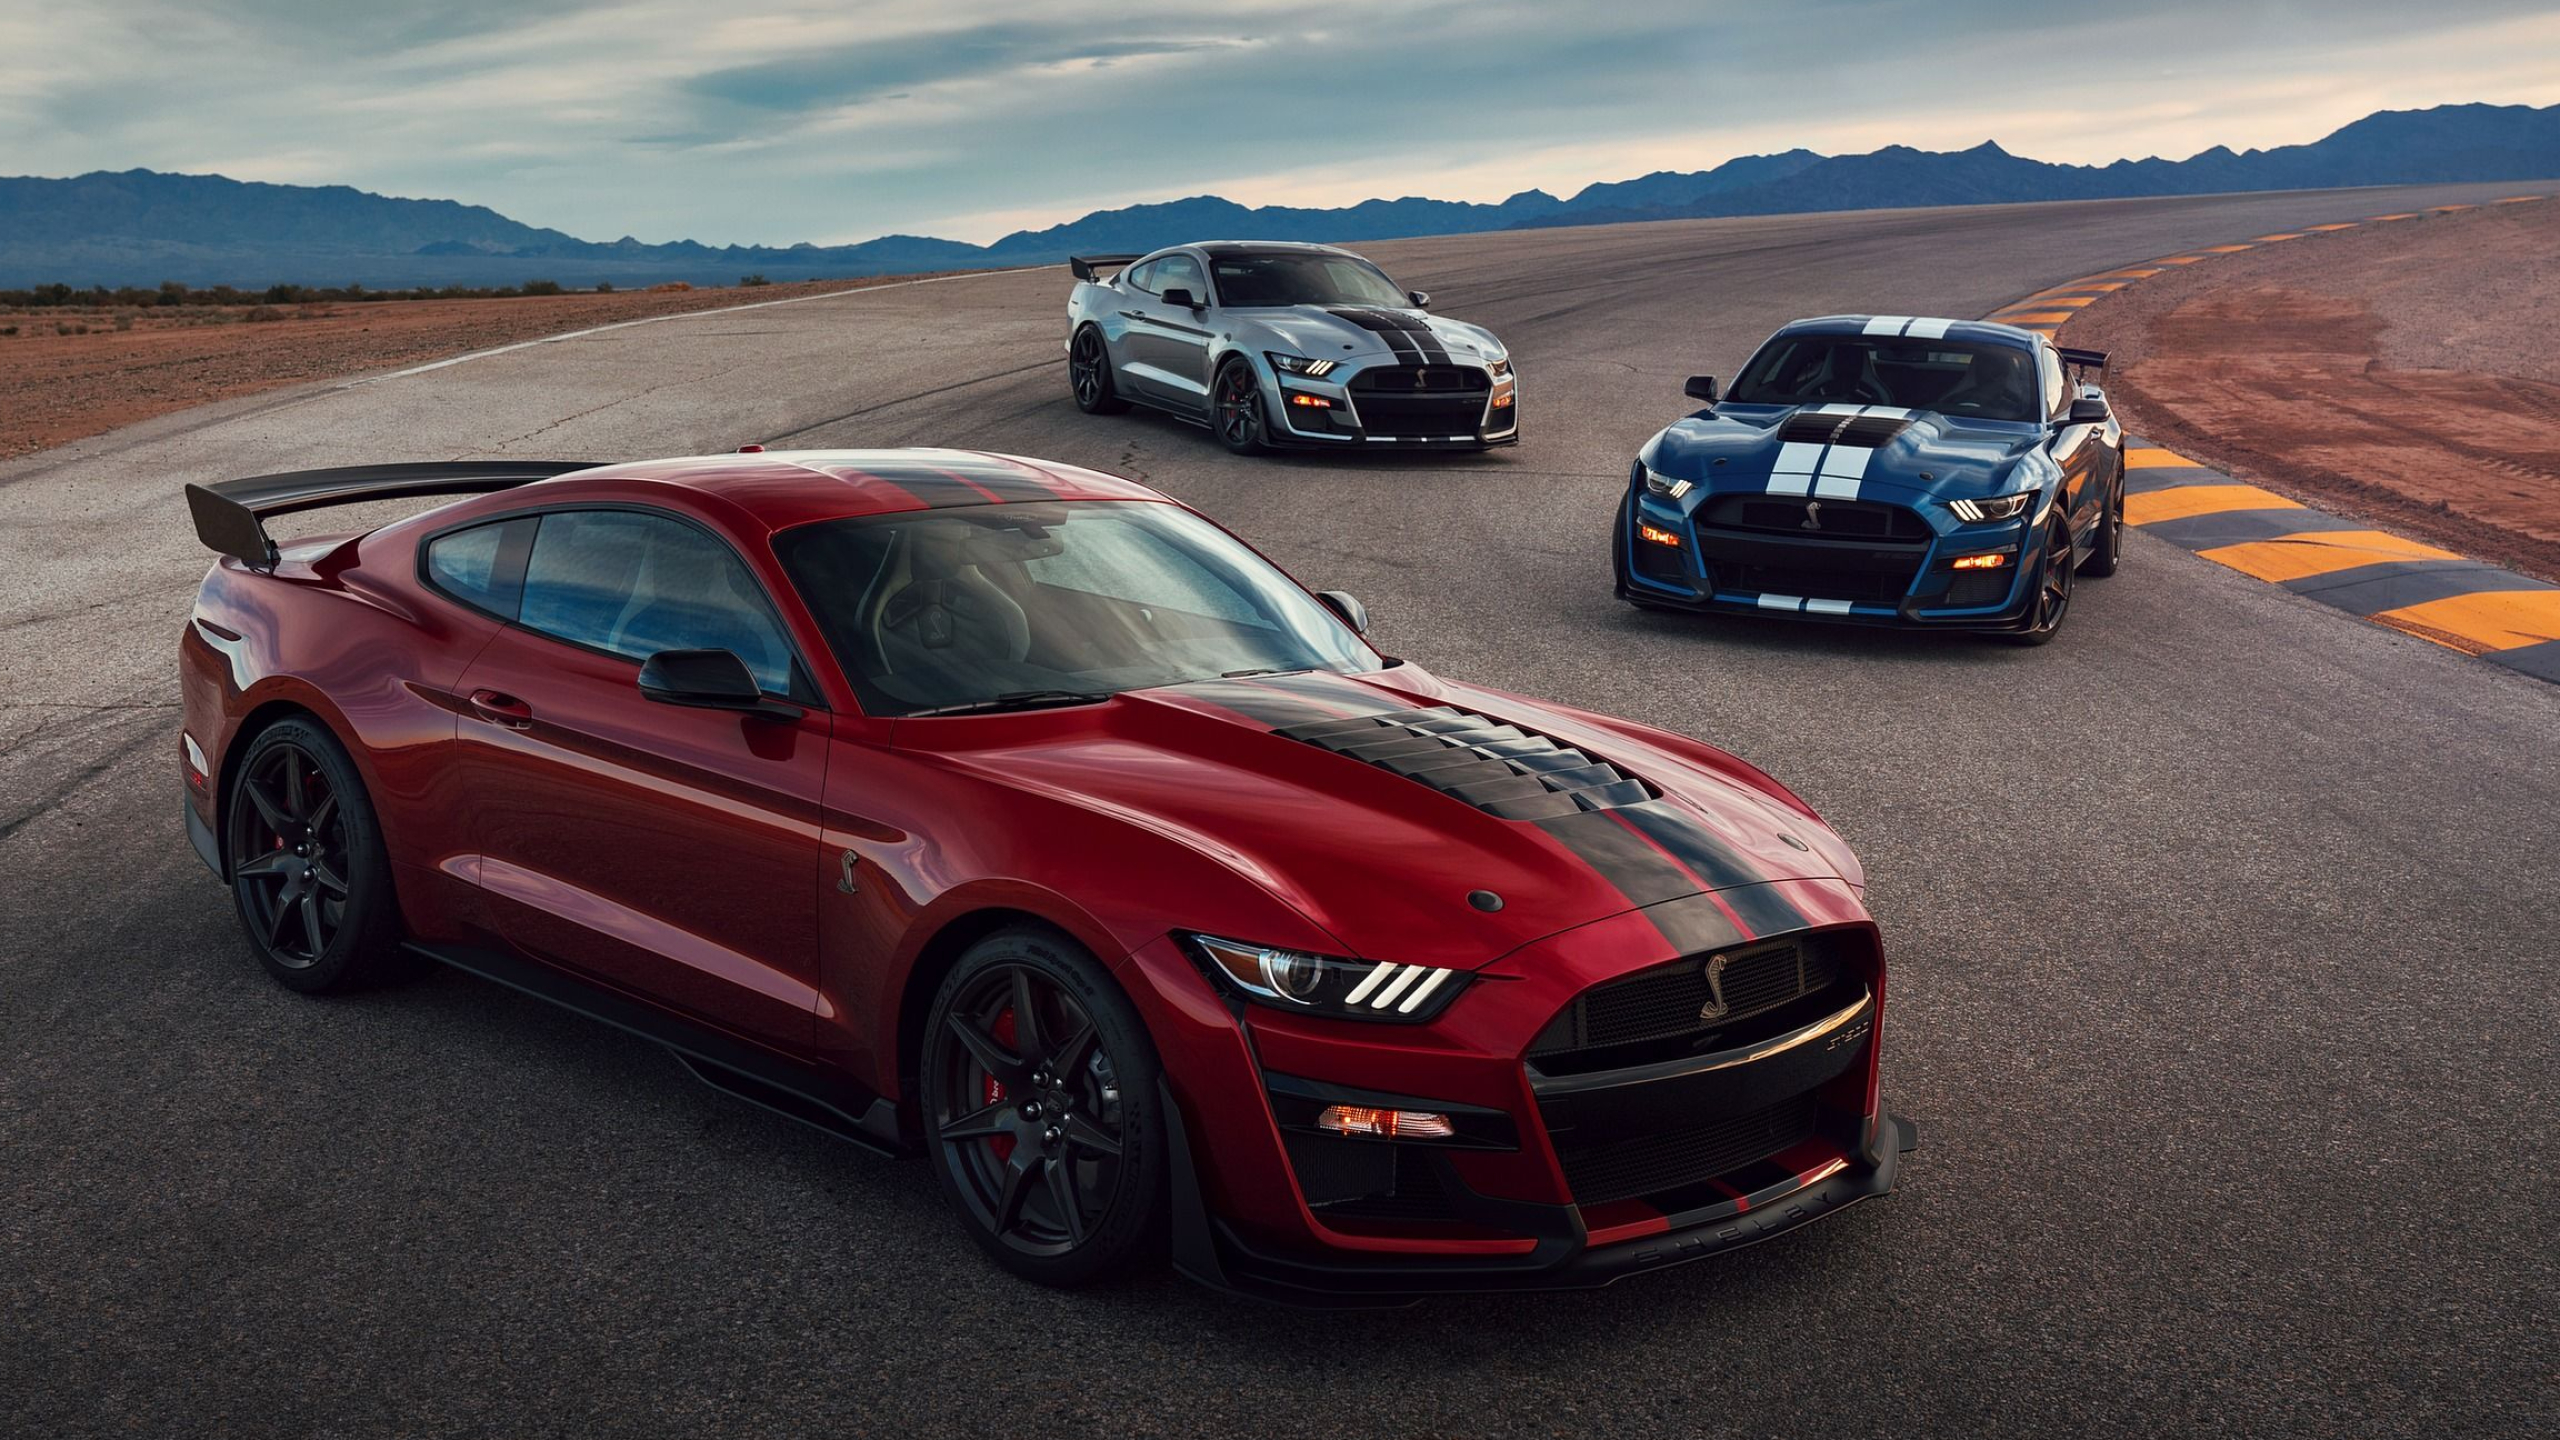 2560x1440 Ford Mustang Shelby GT500 Wallpapers Top Free Ford Mustang Shelby GT500 Backgrounds